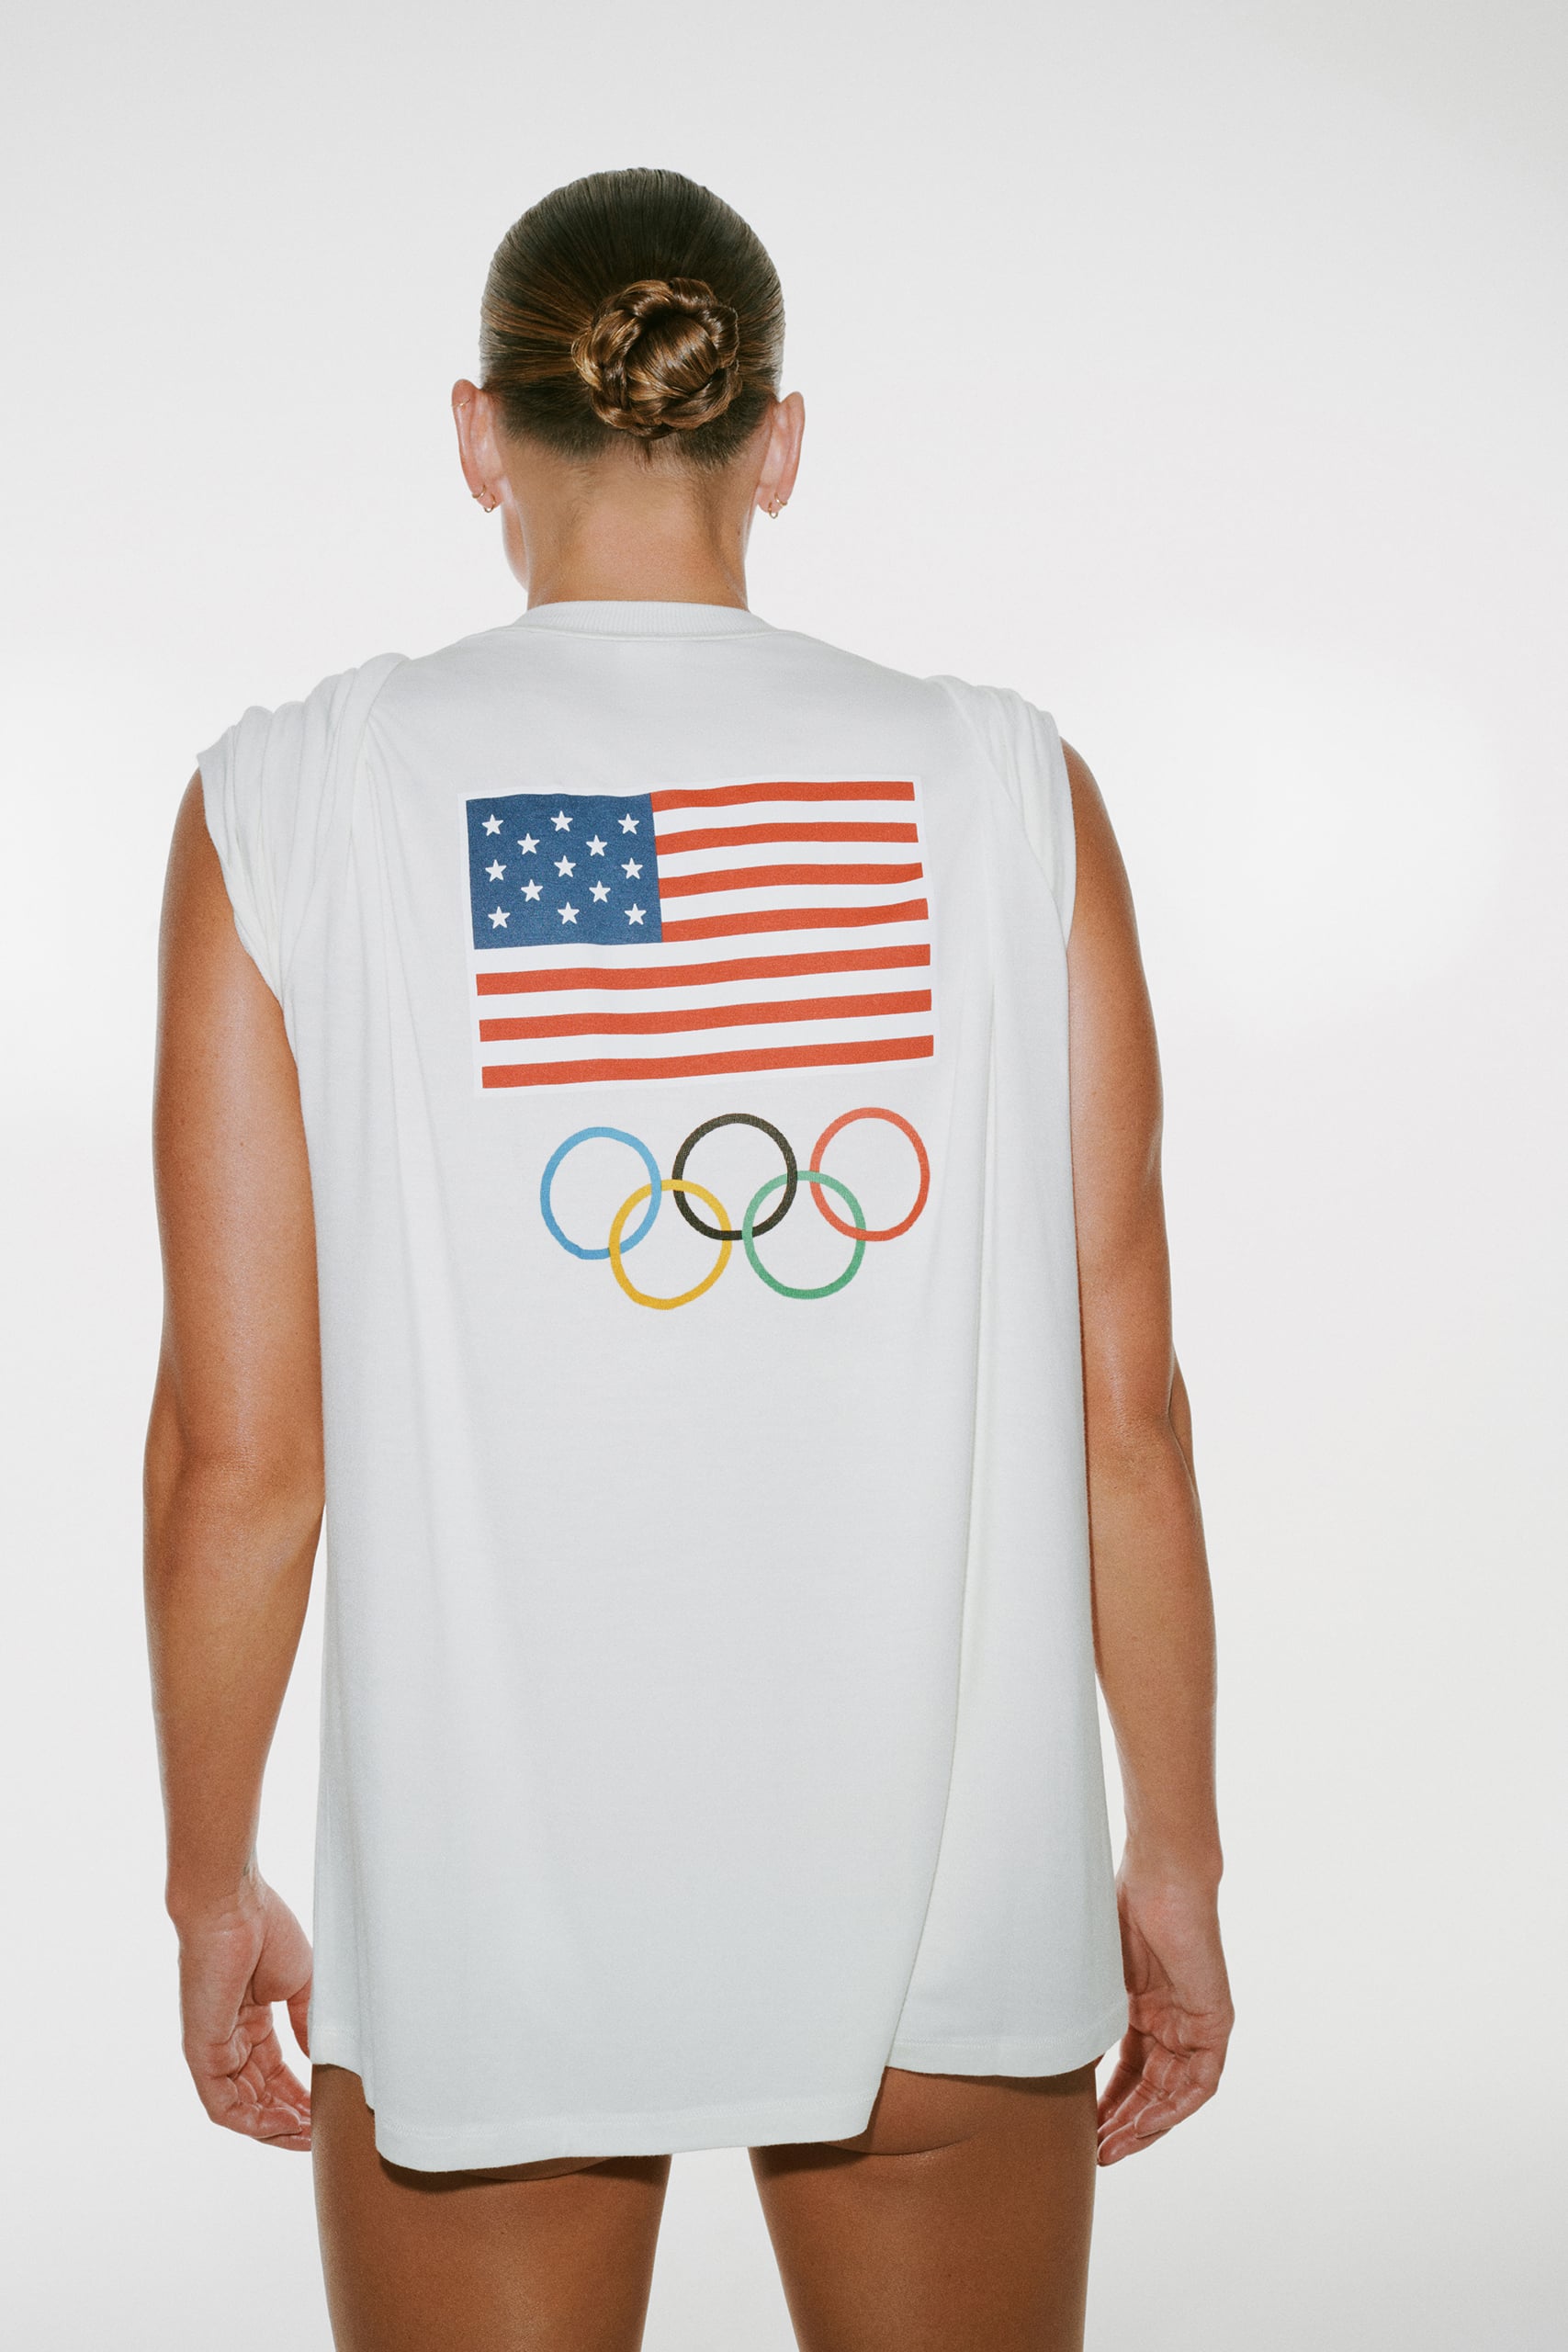 Skims Olympic Loungewear: See the Campaign and Shop the Line